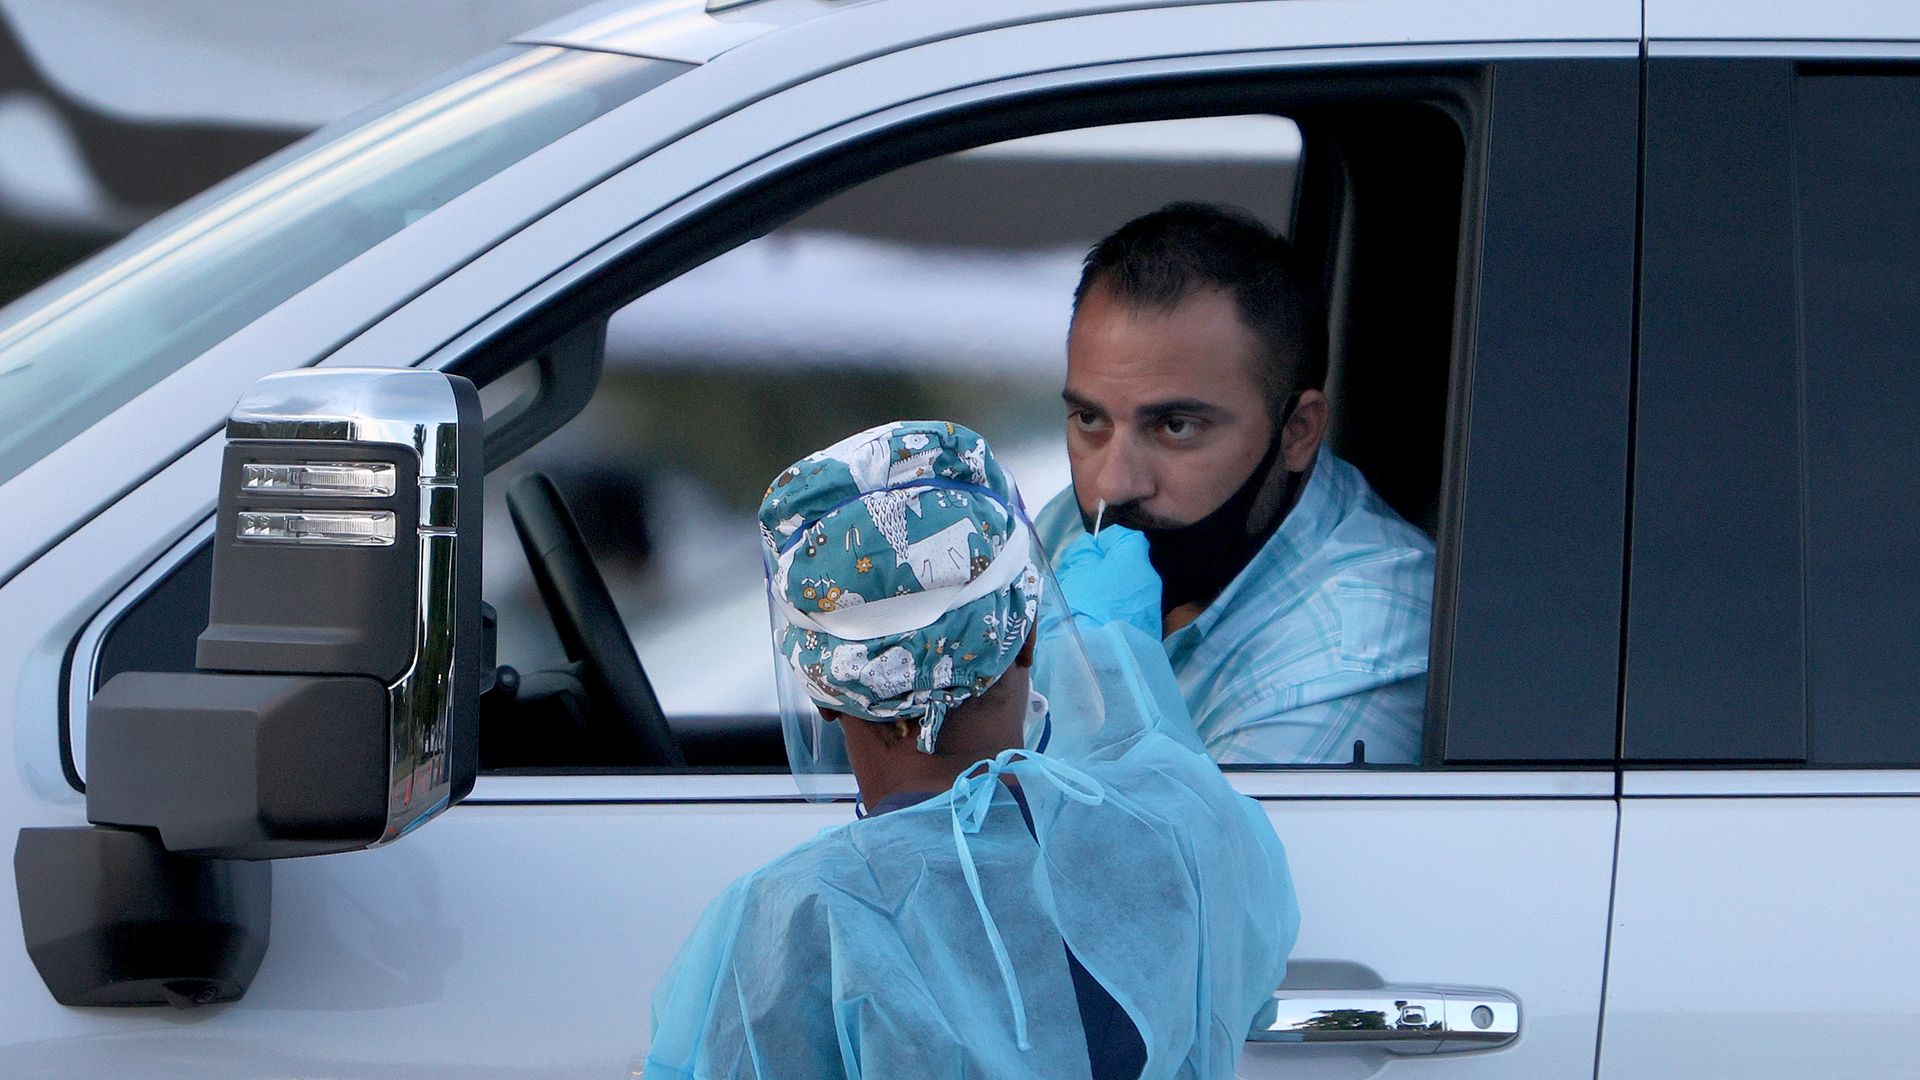 A health care worker in a blue gown gets a COVID test swab from a man in a car.